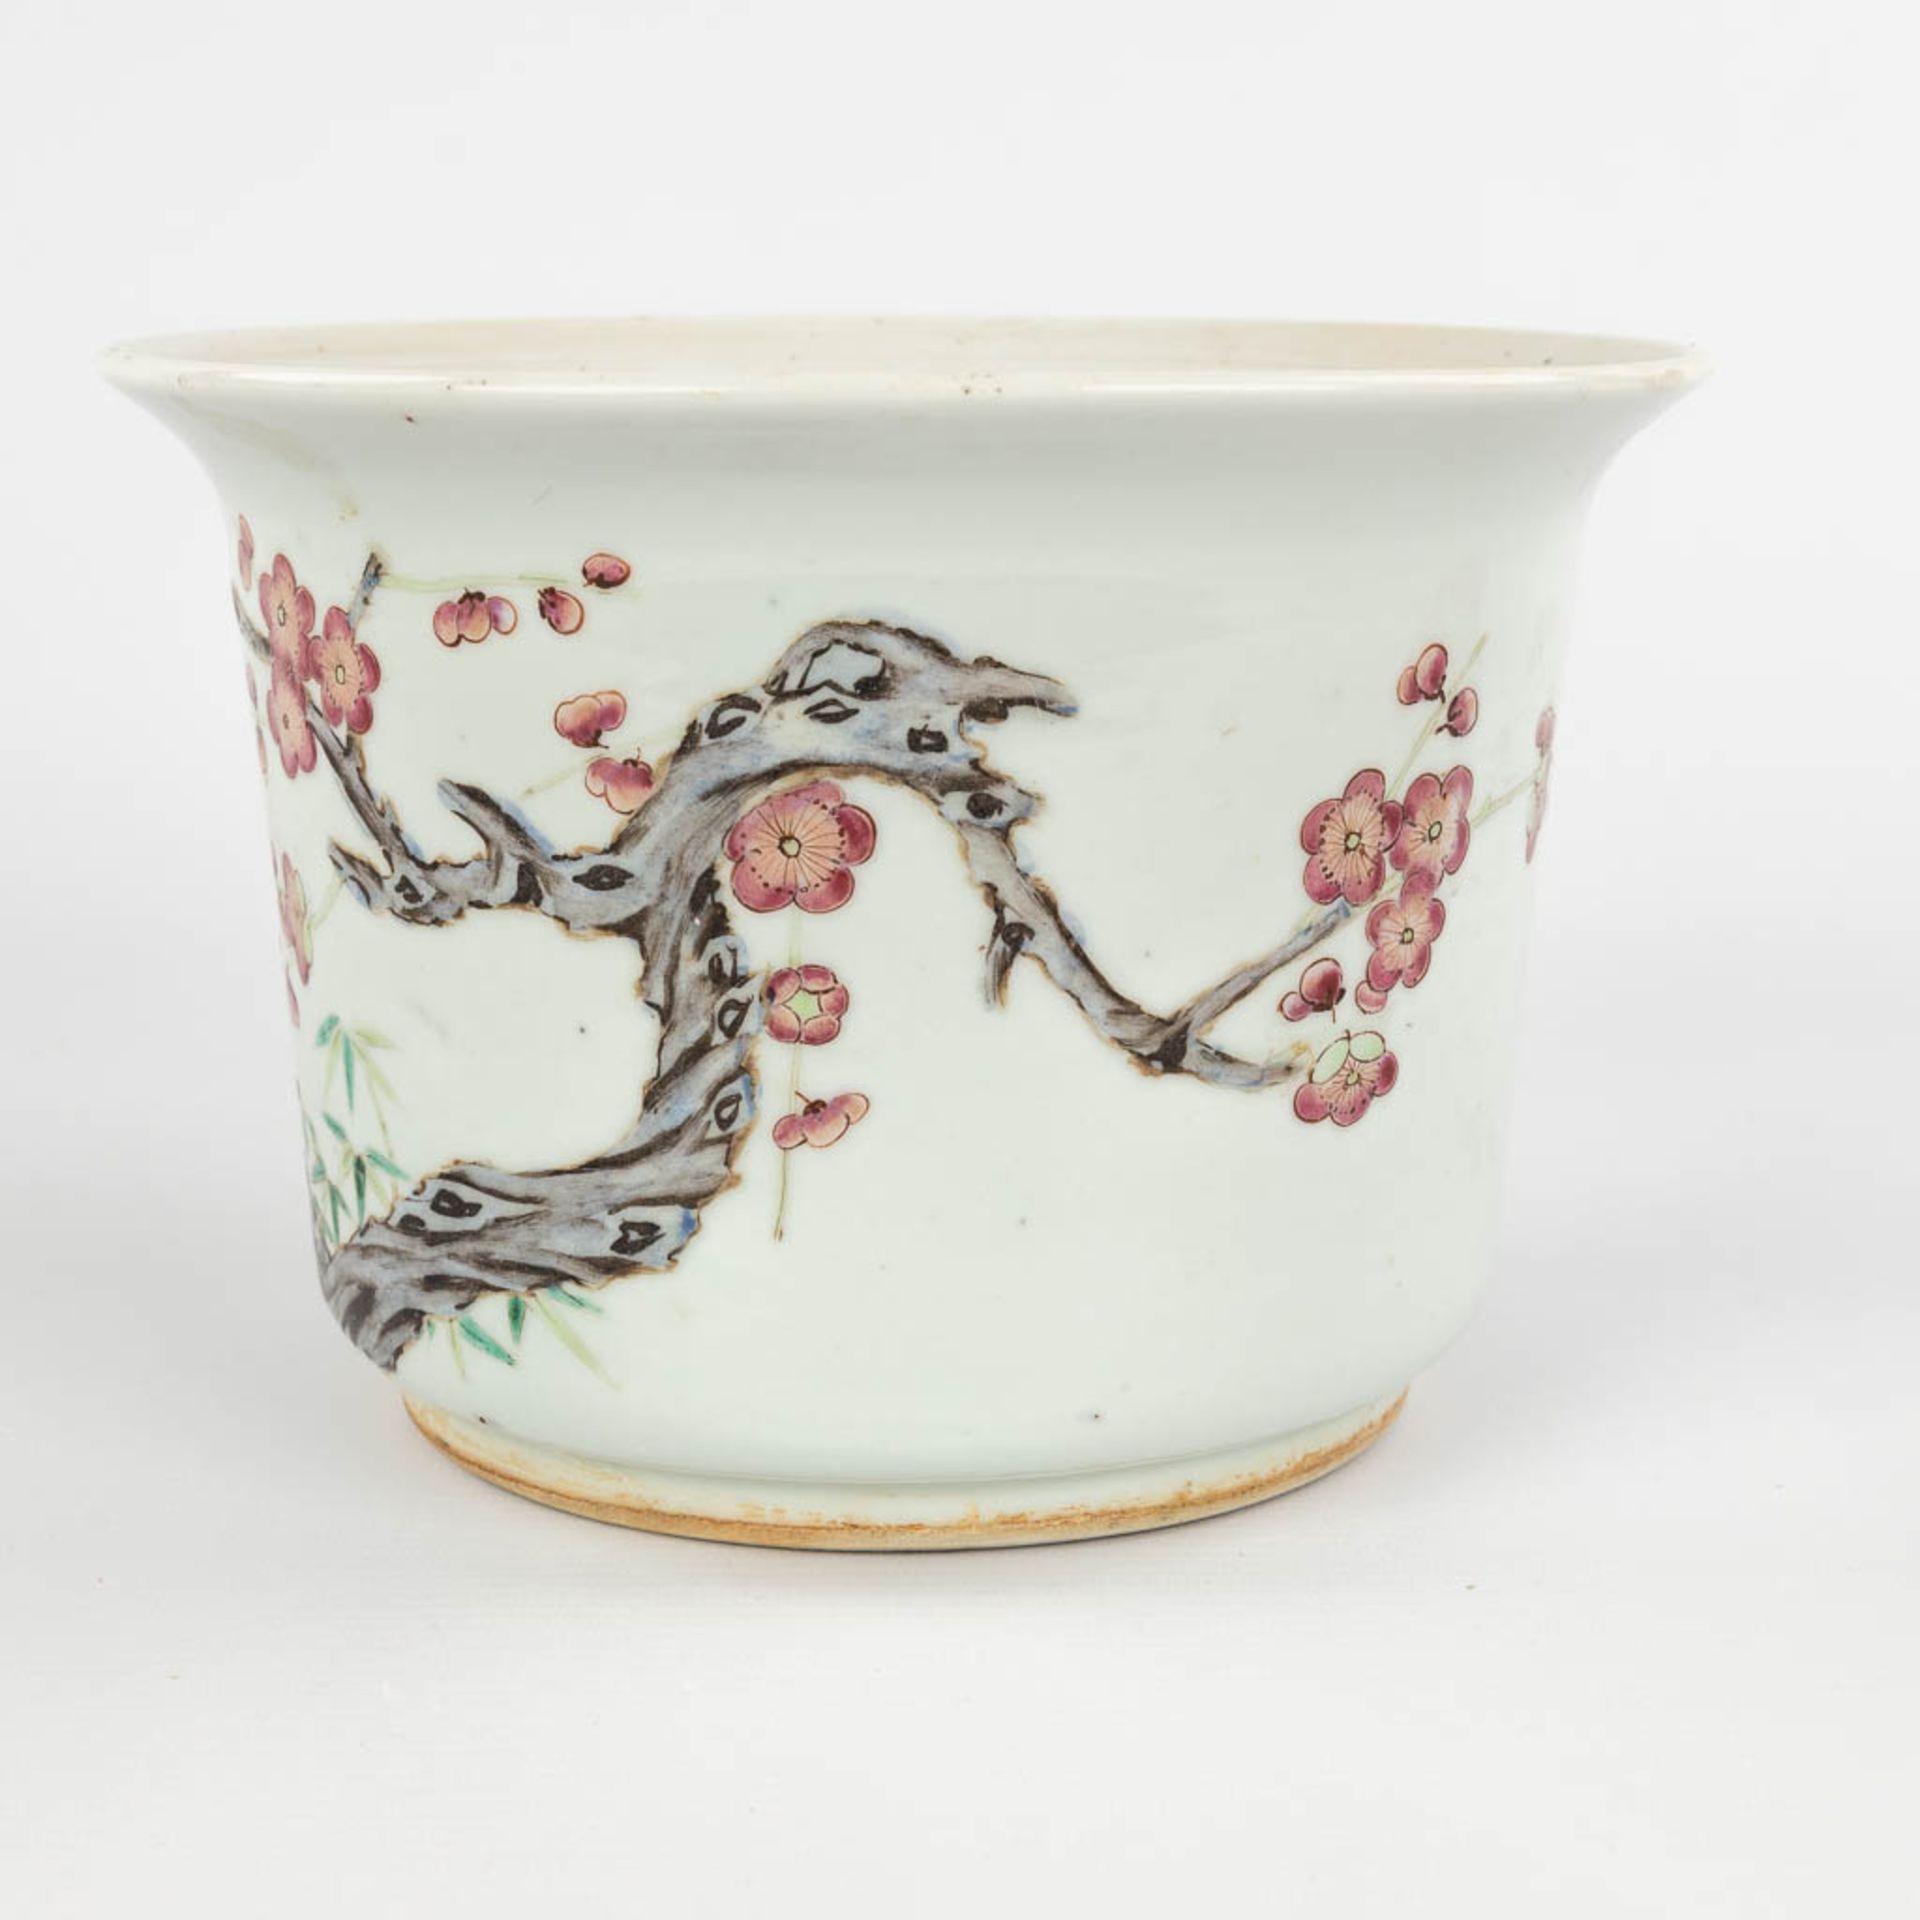 A Chinese flower pot, decorated with spring flowers, 19th/20th C. (H:15,5 x D:22 cm) - Image 7 of 12